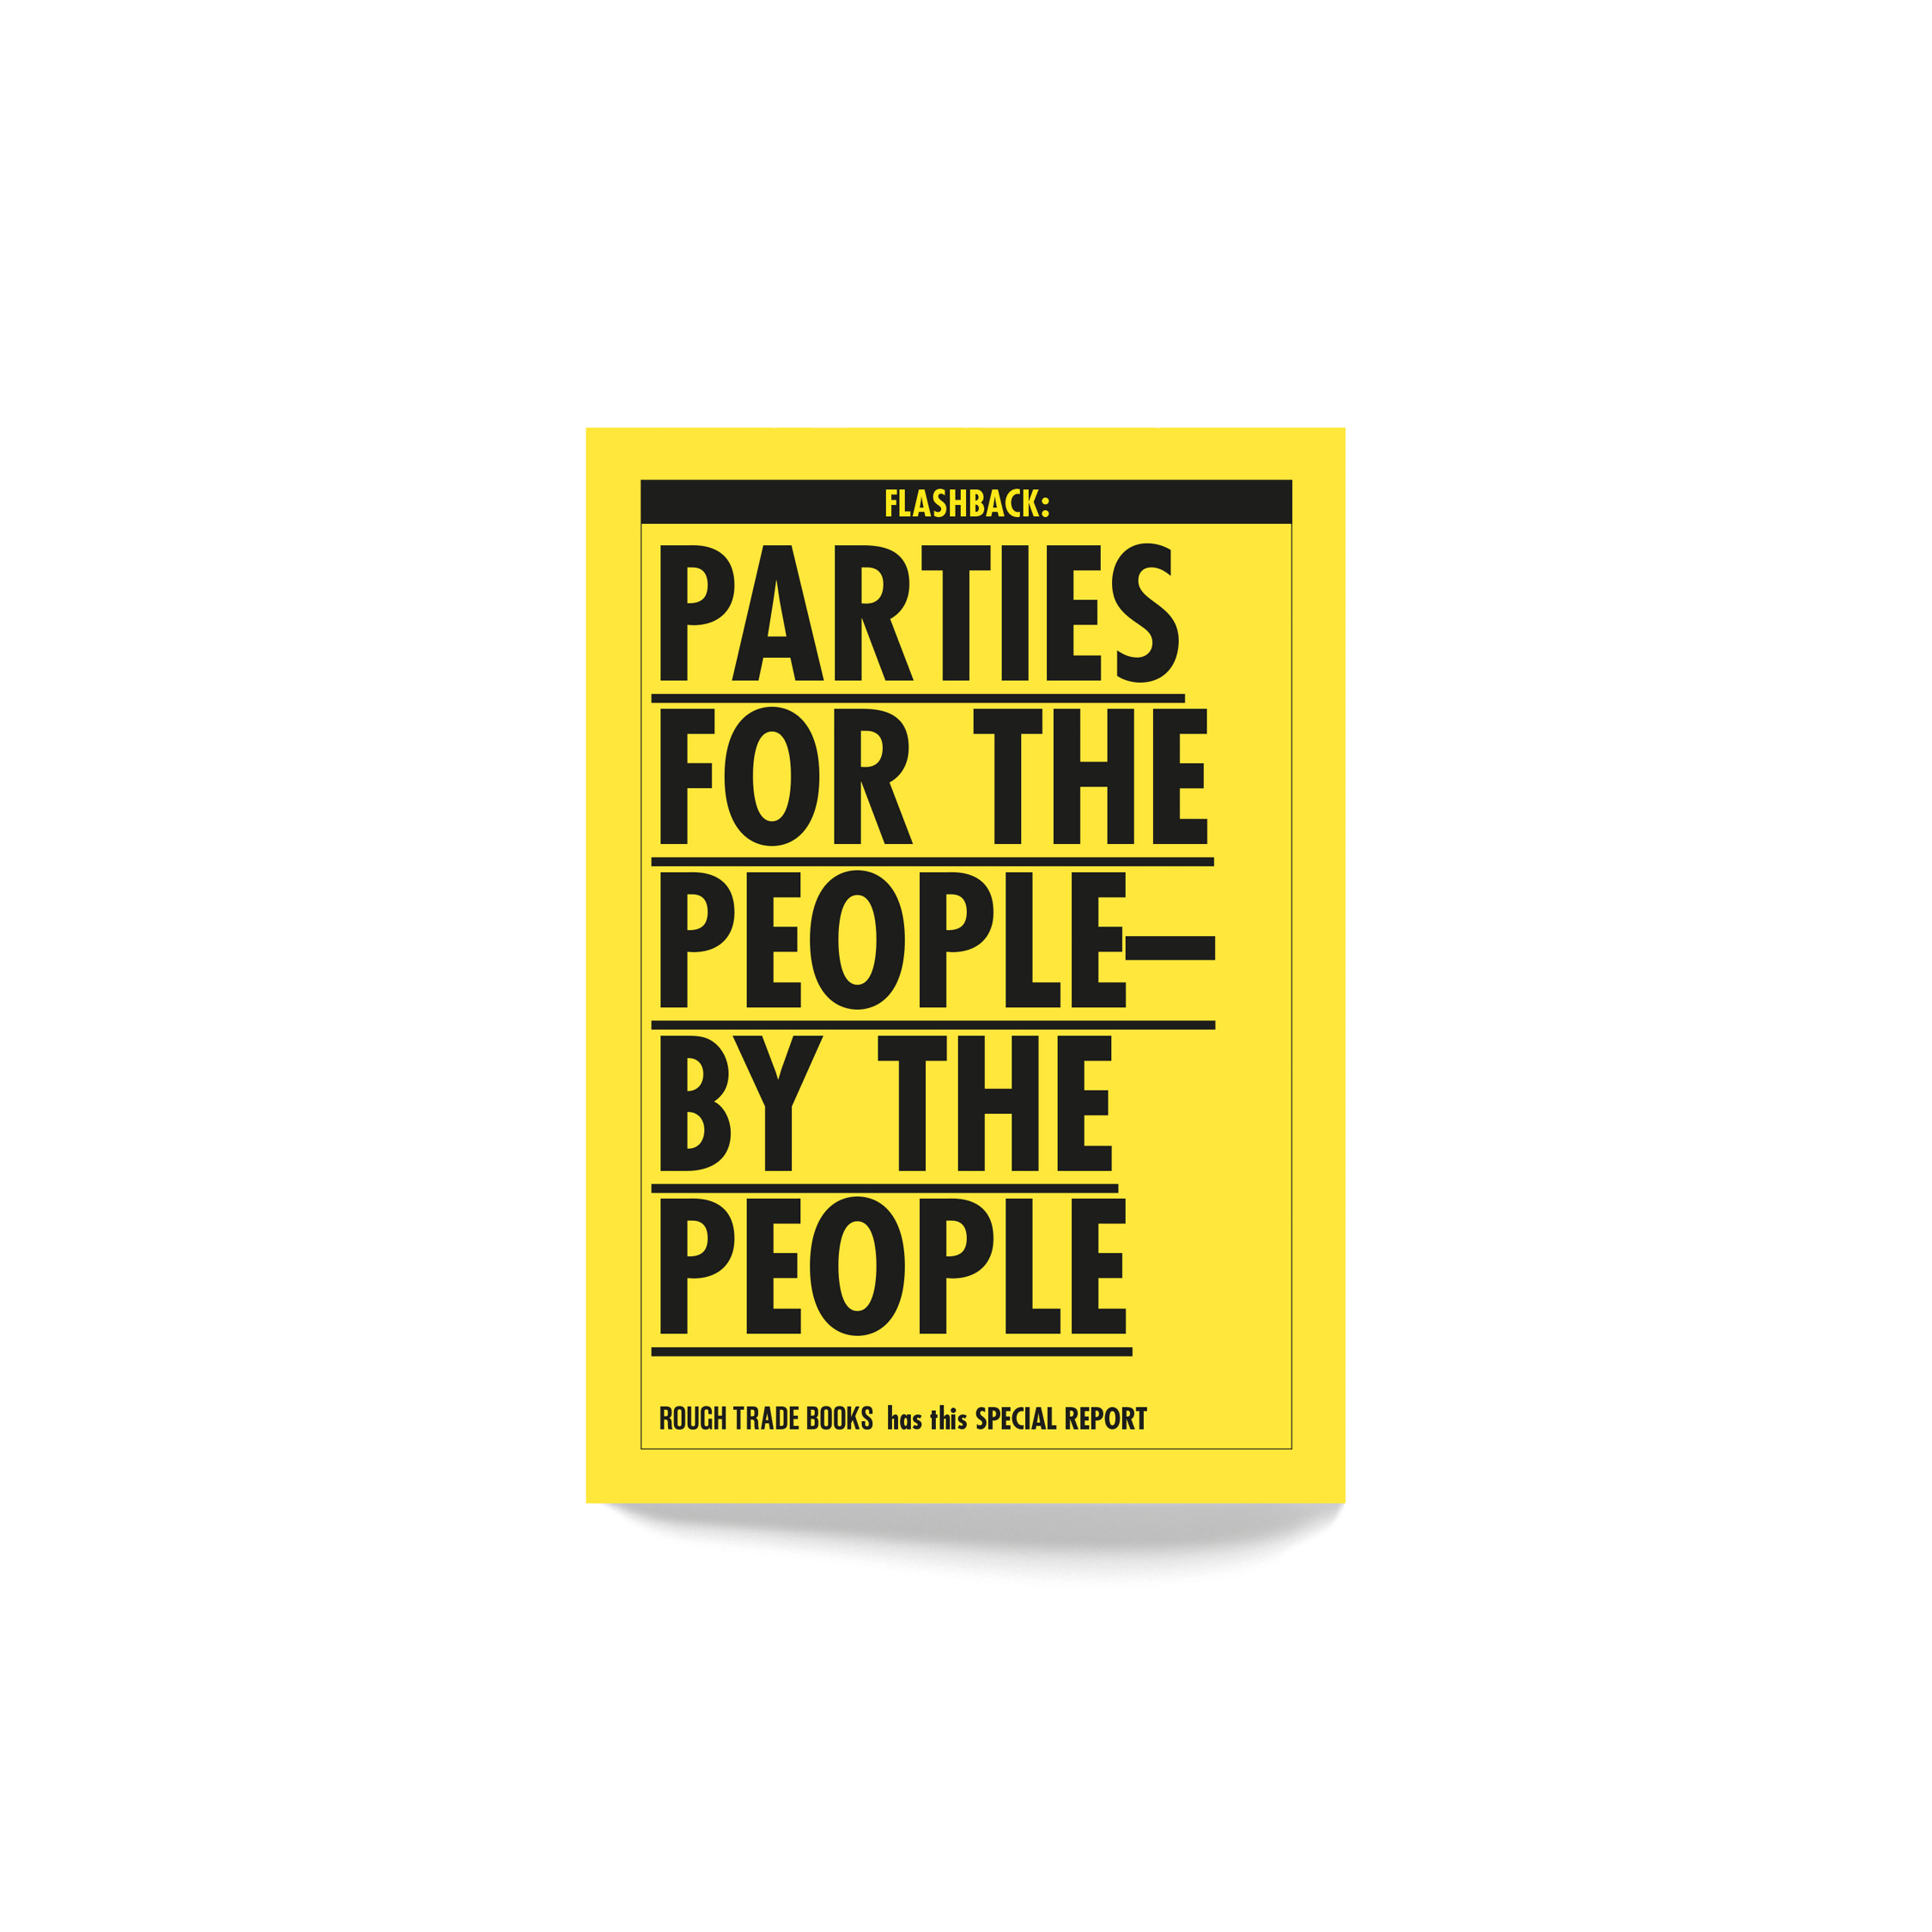 Parties for the People by the People